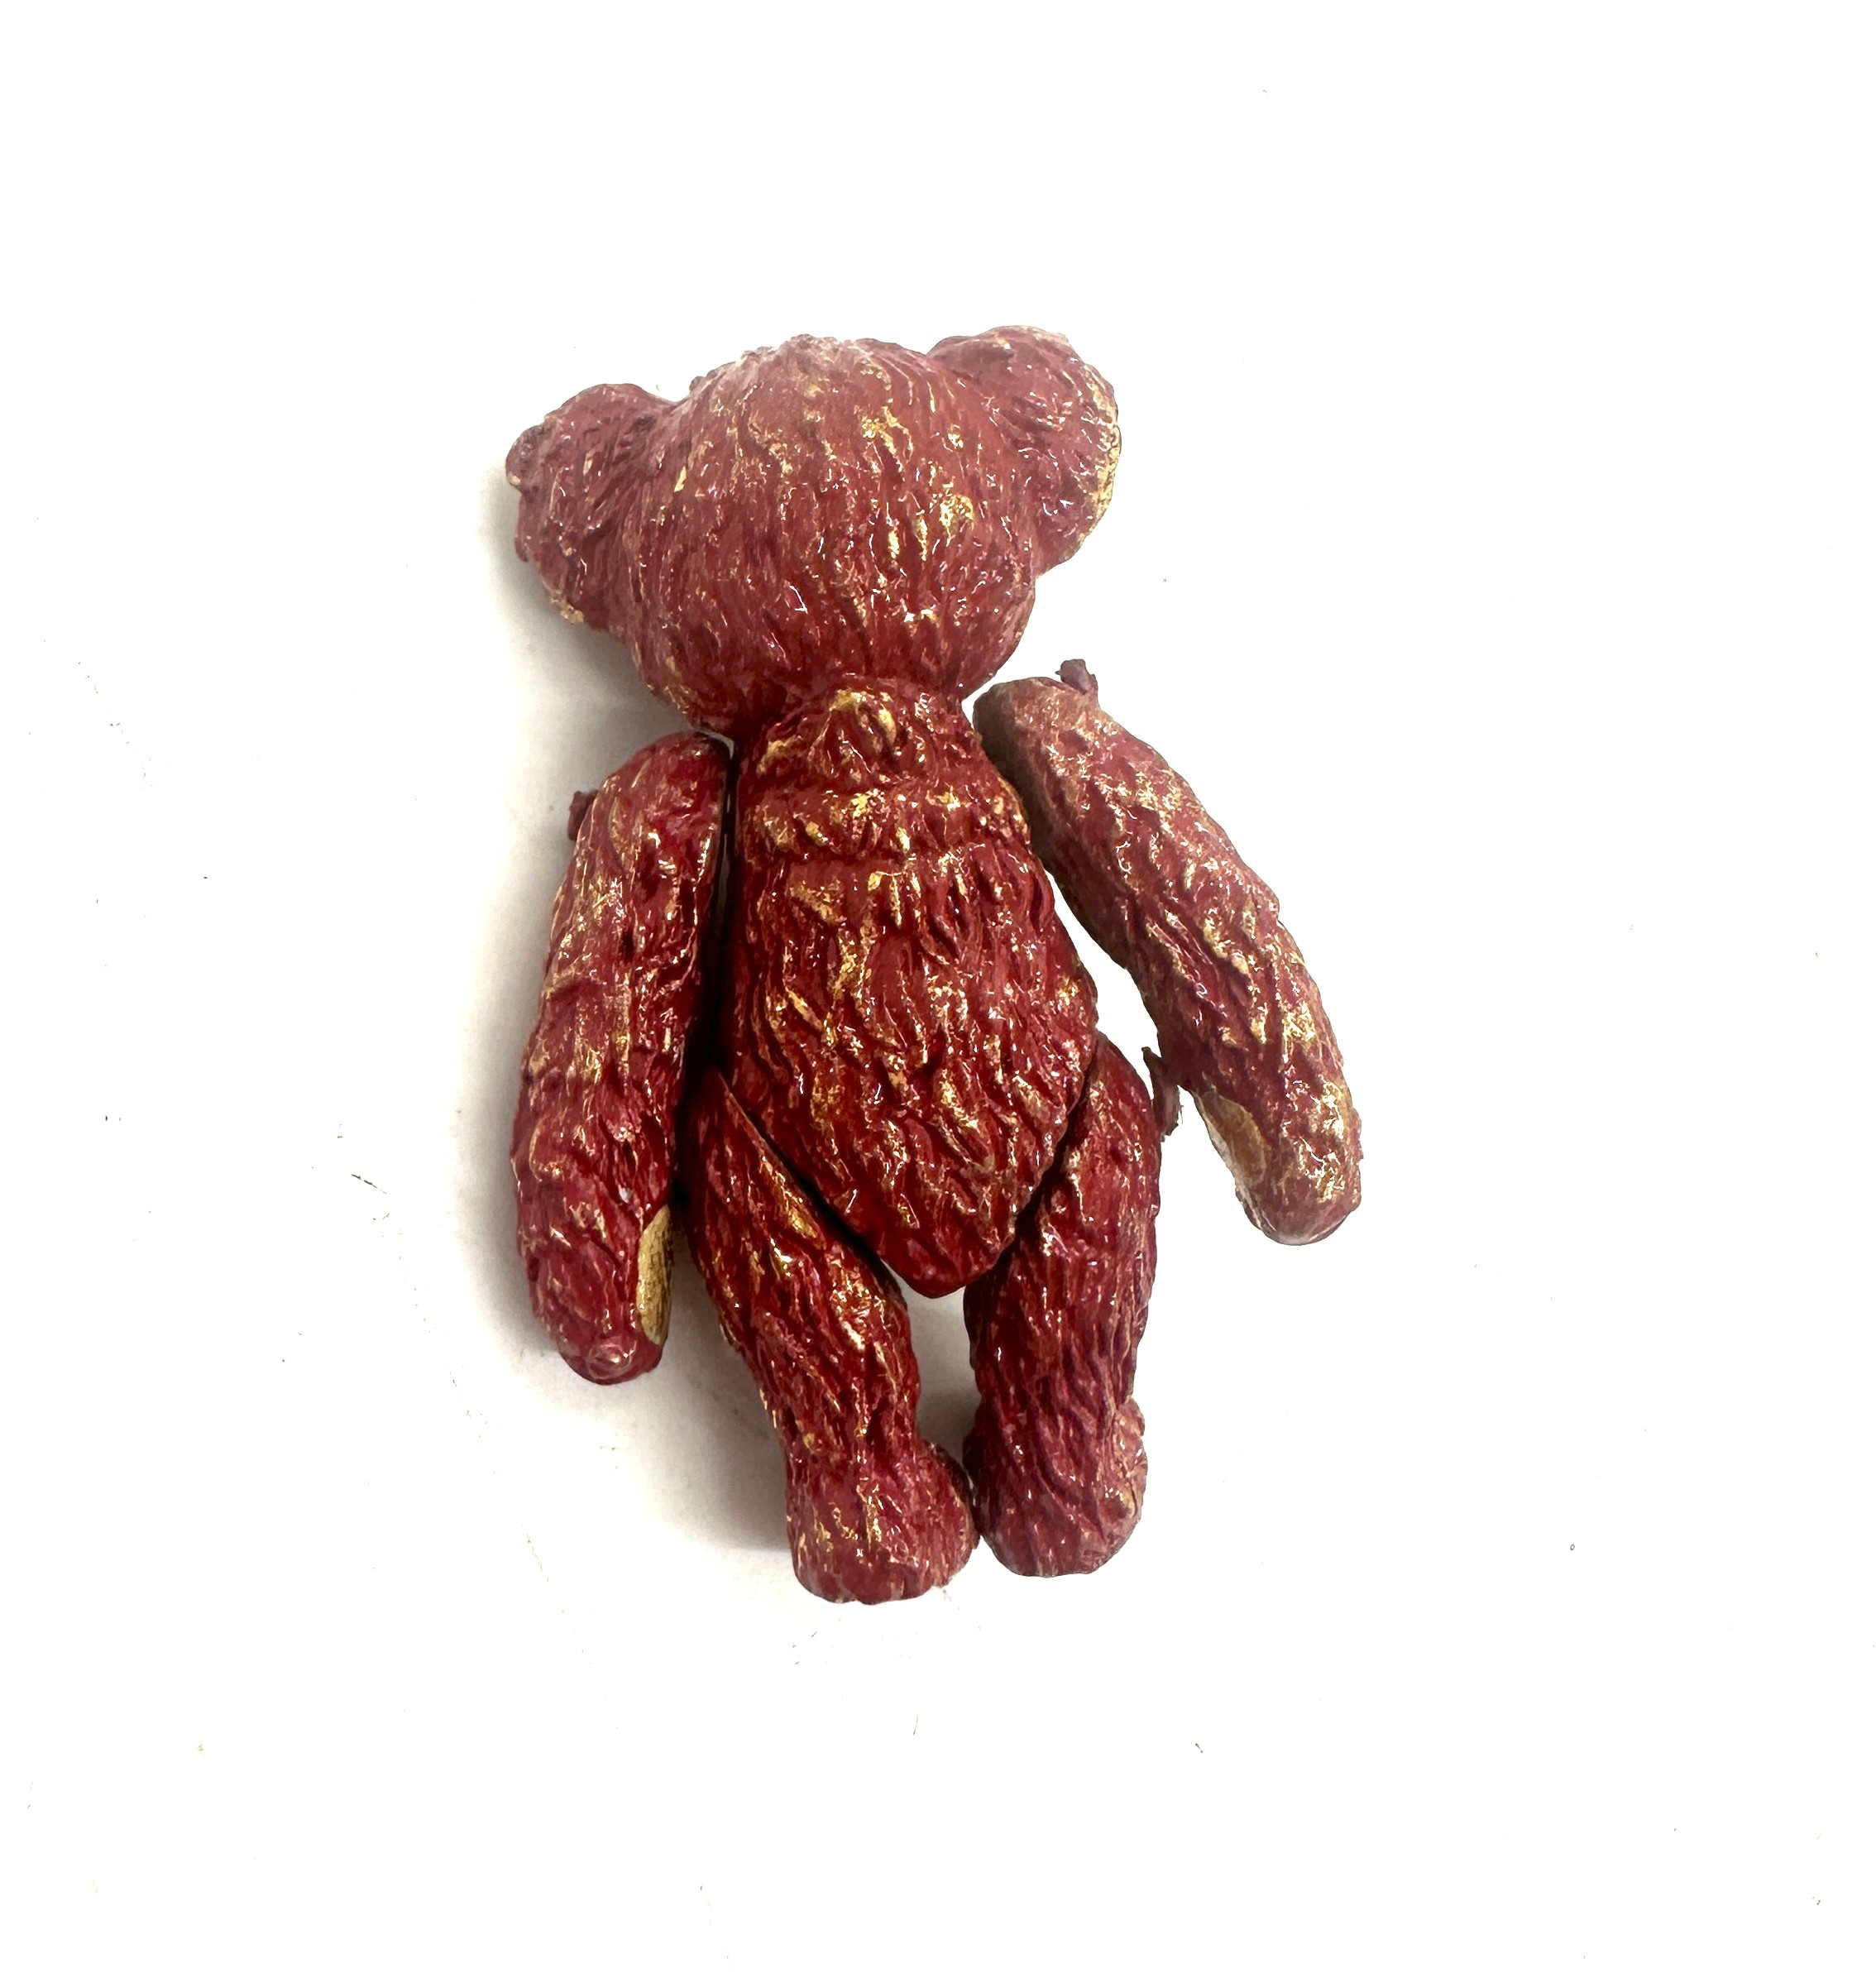 Steiff metal teddy, moveable arms and legs, height of teddy 2 inches - Image 3 of 4